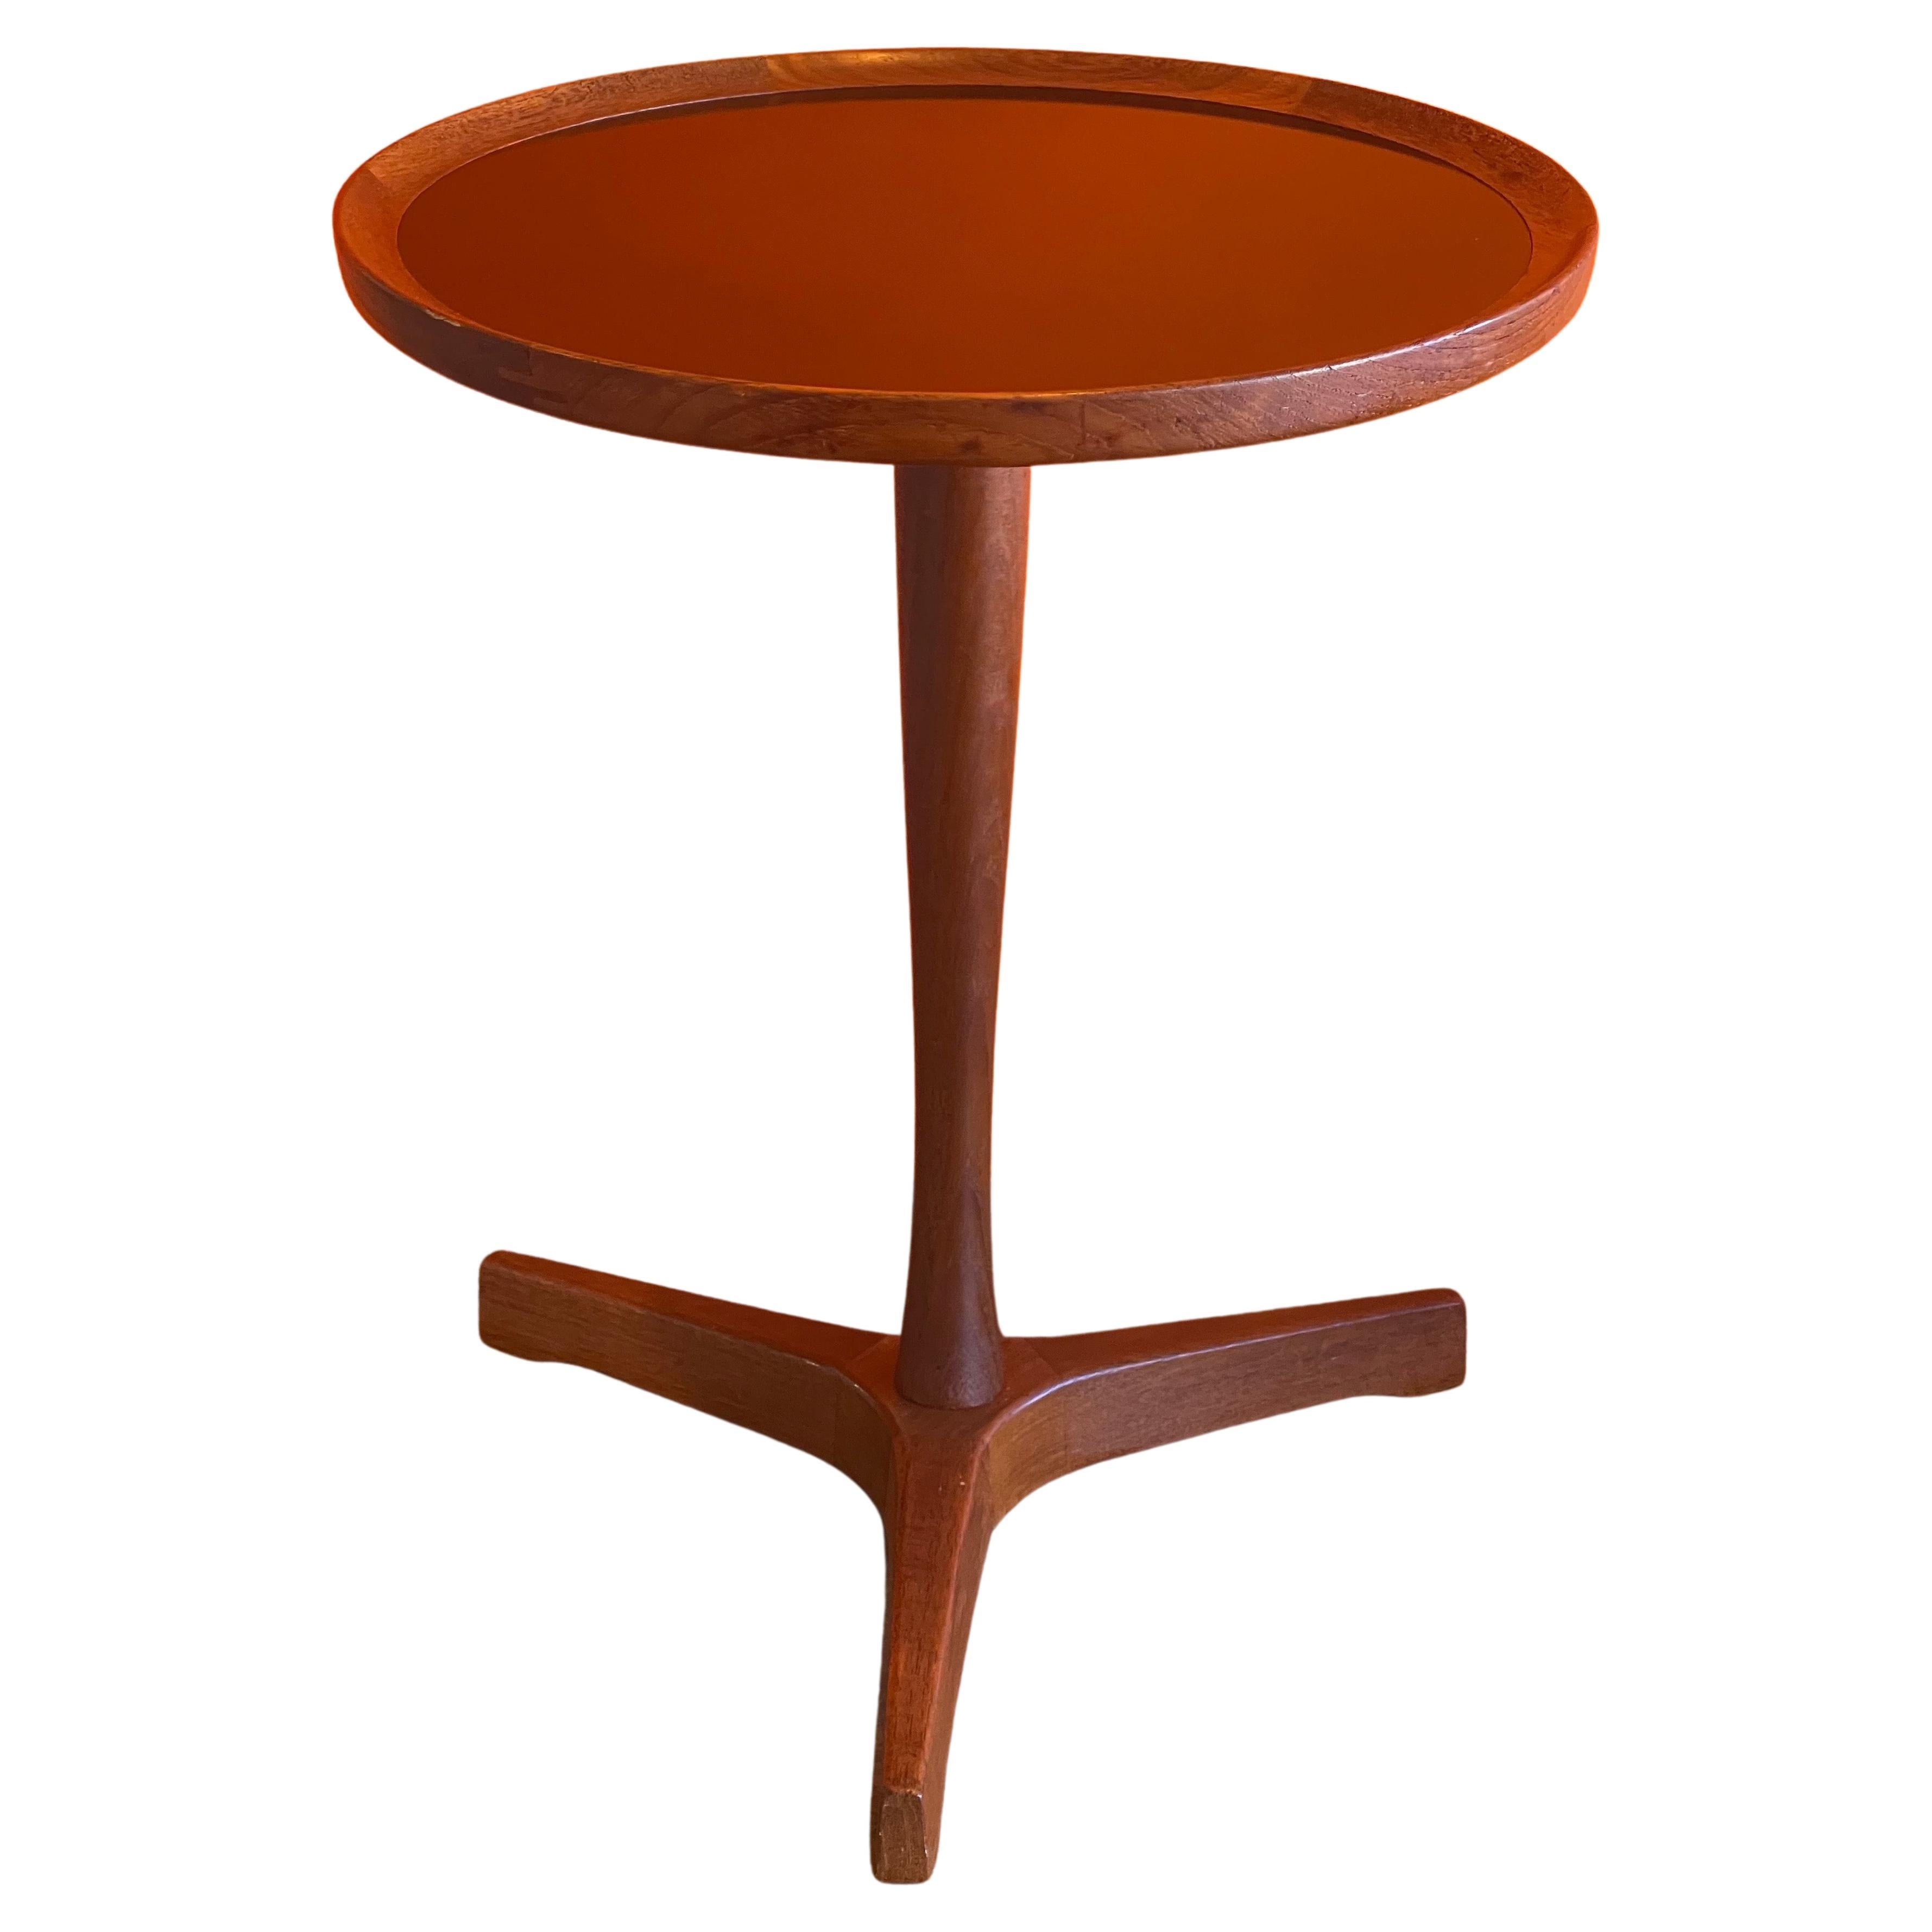 Rare petite teak occasional table with black melamine top by Hans C. Andersen, circa 1950s. This small table has beautiful wood joints on the table top along with excellent detailing and craftsmanship. The table is in very good vintage condition